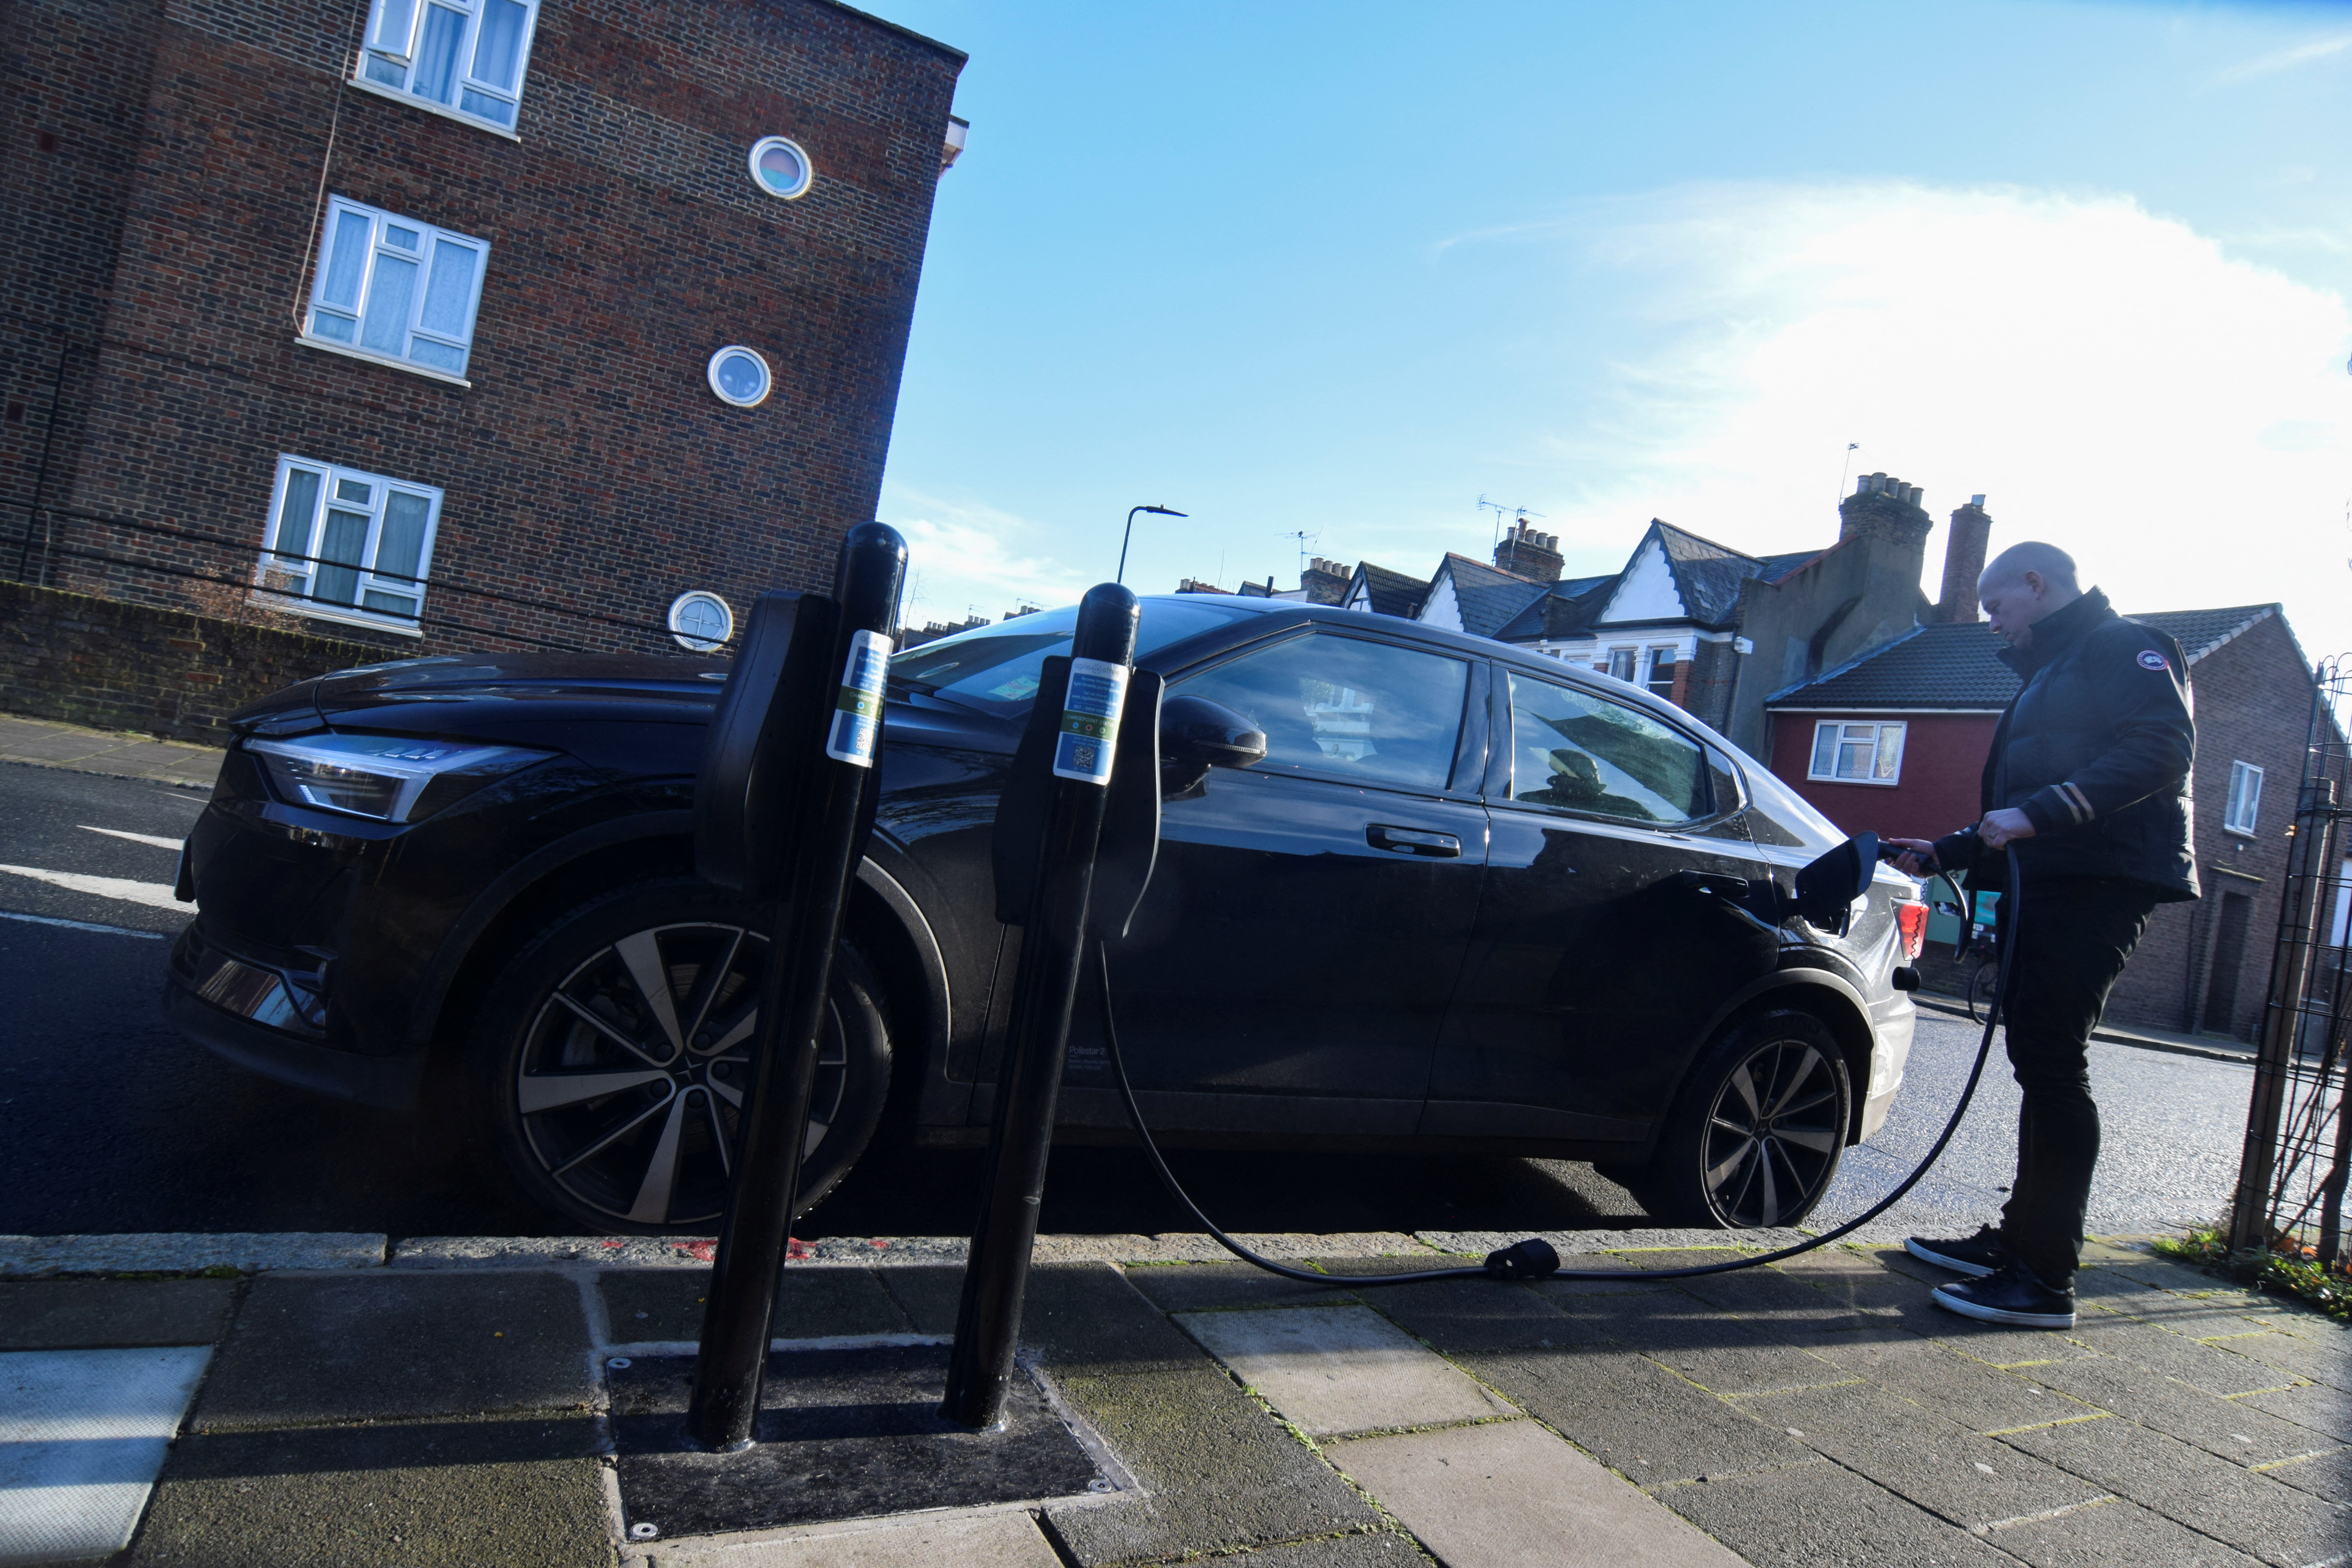 Connected Kerb CEO Chris Pateman-Jones plugs his electric vehicle into one of the charging infrastructure company's smart public on-street chargers in the borough of Hackney, London